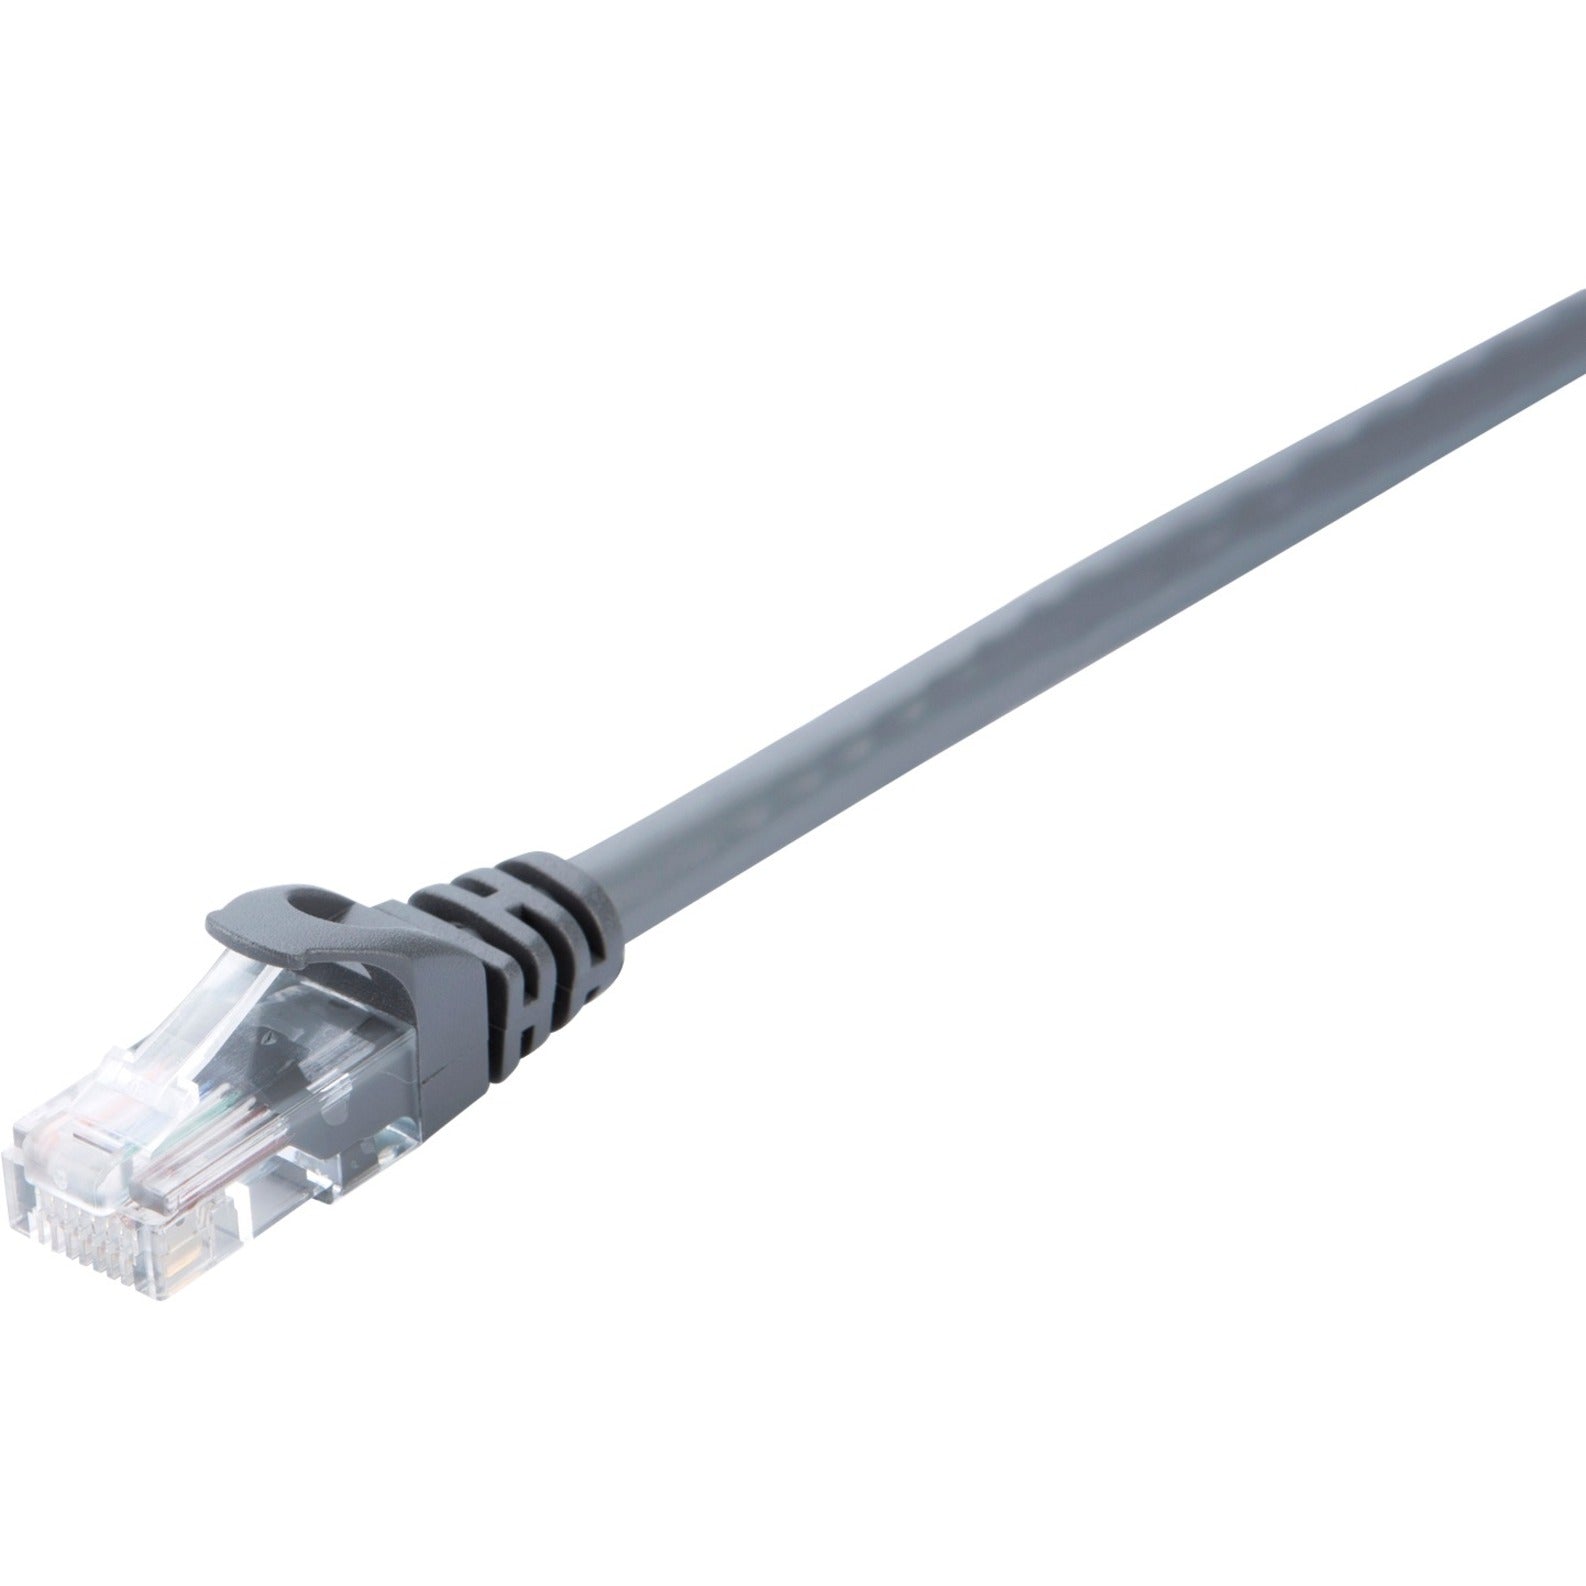 V7 V7CAT6UTP-02M-GRY-1E Grey Cat6 Unshielded (UTP) Cable RJ45 Male to RJ45 Male 2m 6.6ft, Noise Reducing, Crosstalk Protection, Snagless Boot, Strain Relief, Molded